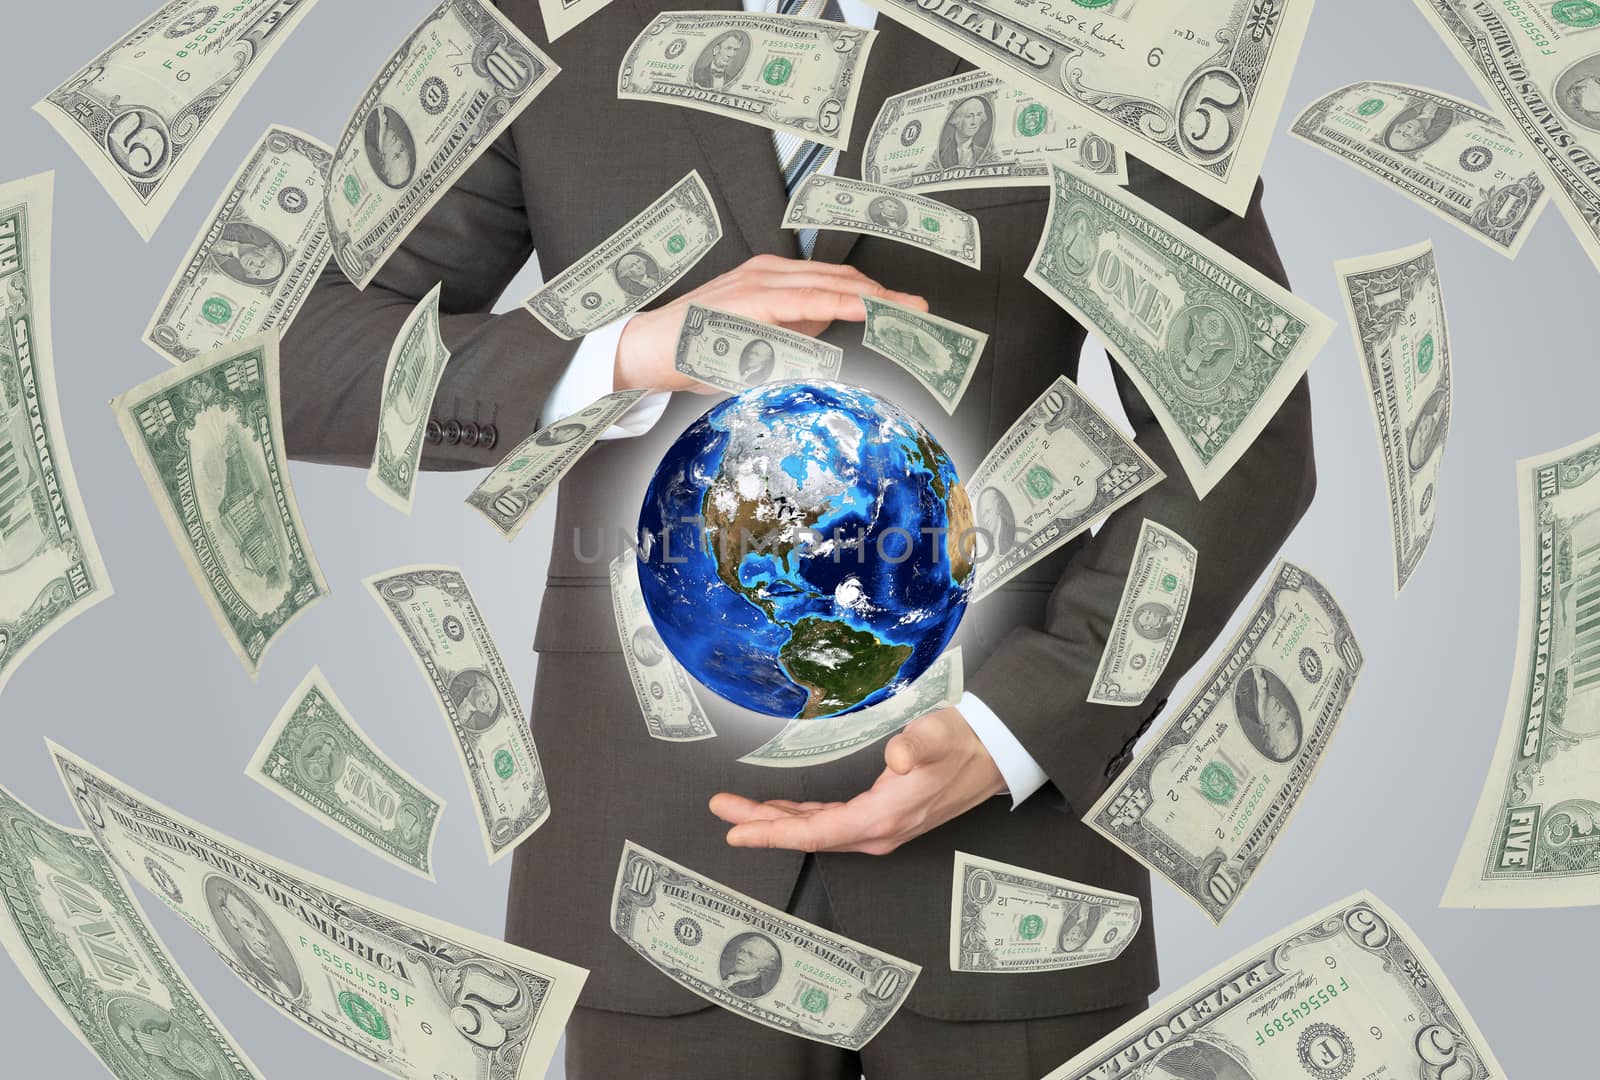 Businessman in a suit holding a earth. Money falling around